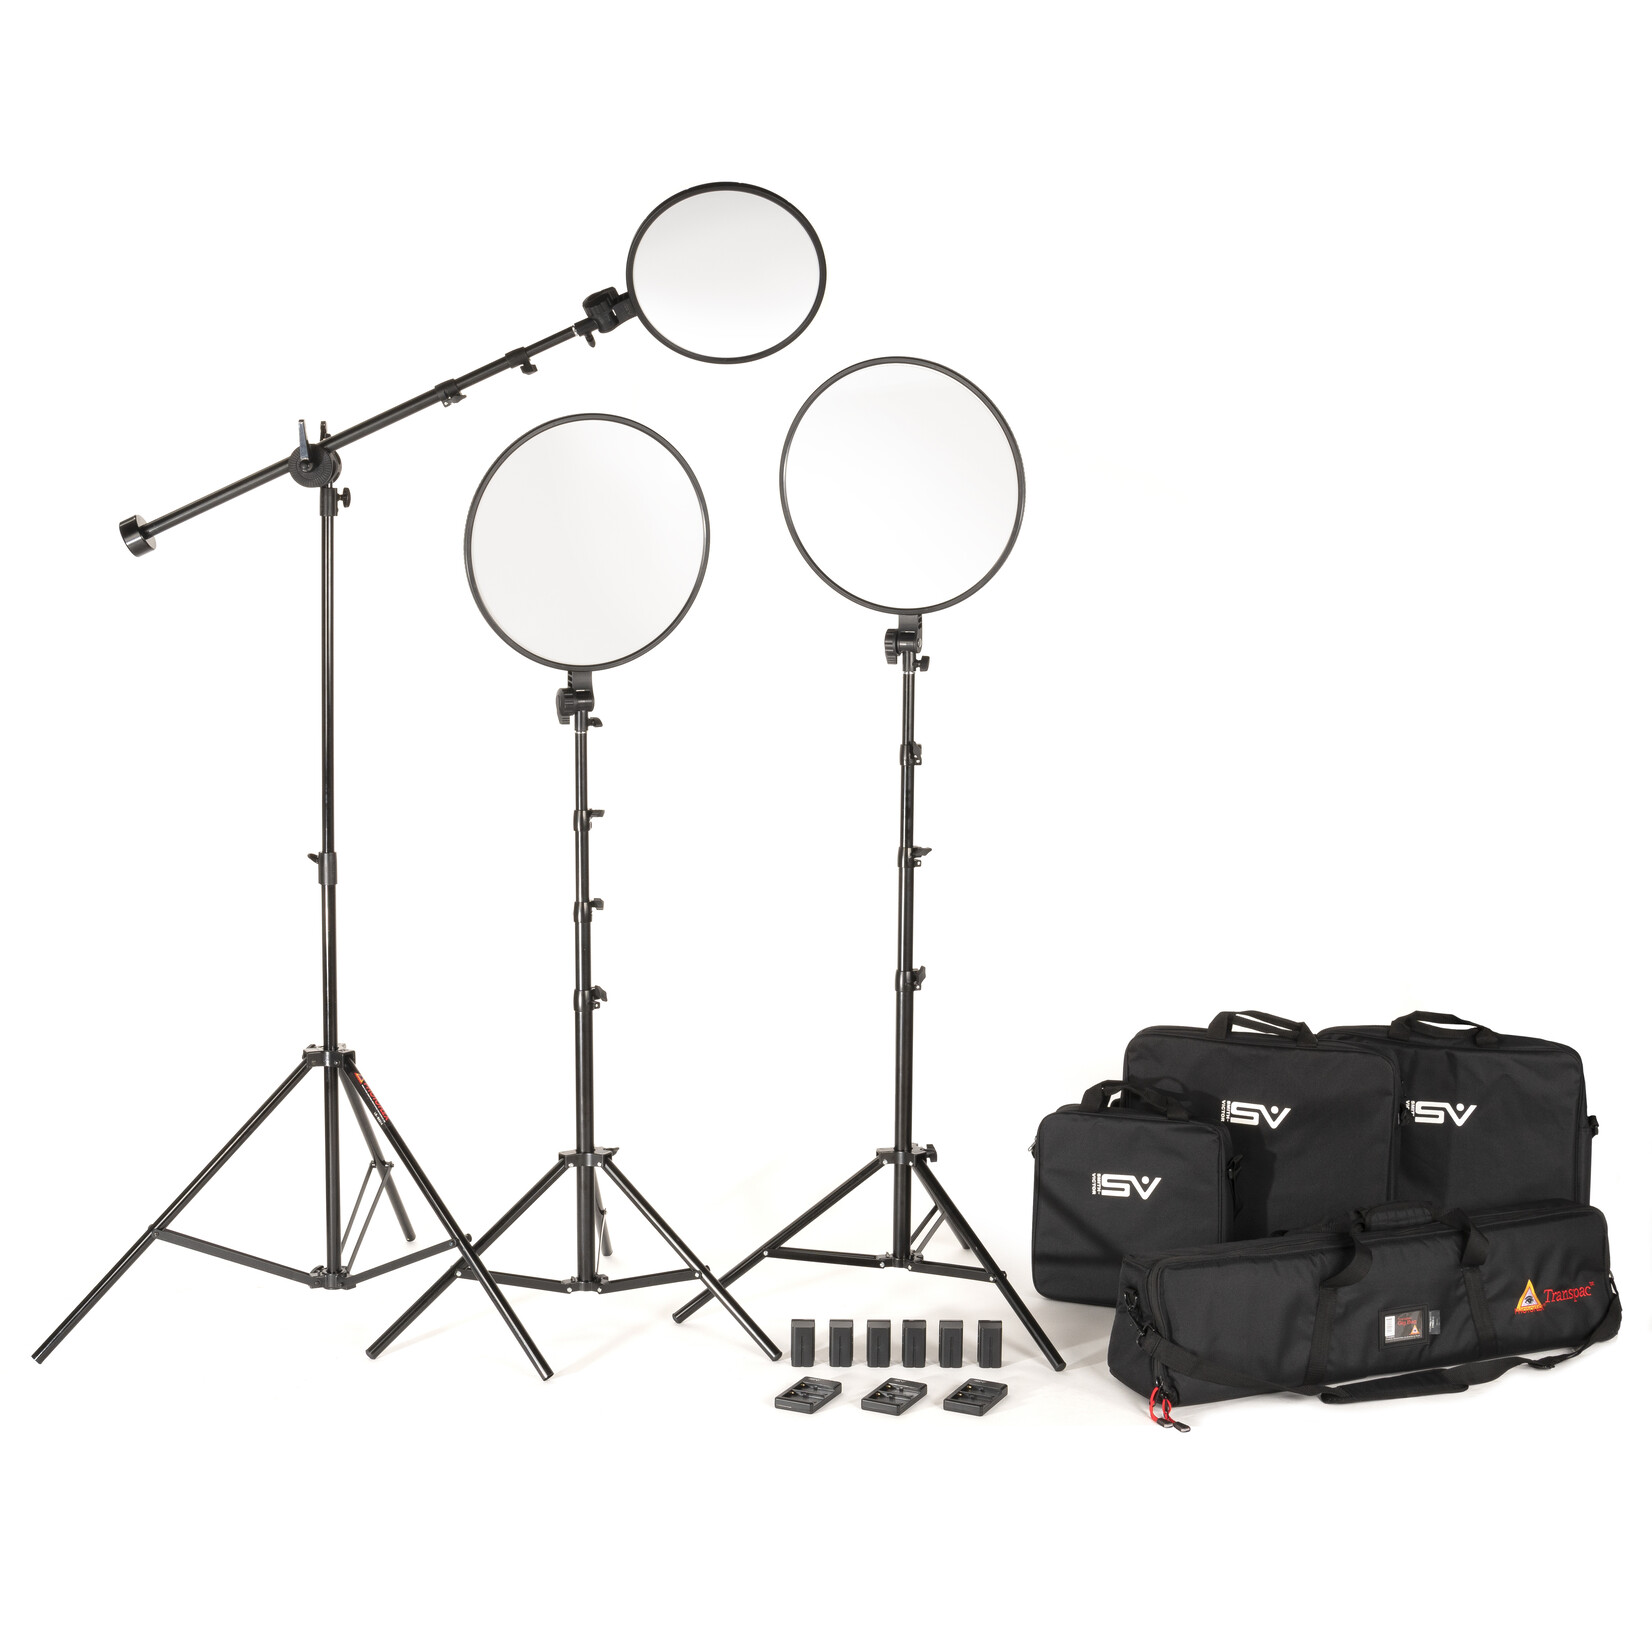 Smith Victor LED EDGE360 2-18" and 1-13" Boom Light Kit PRO SERIES 1560W Bi-Color